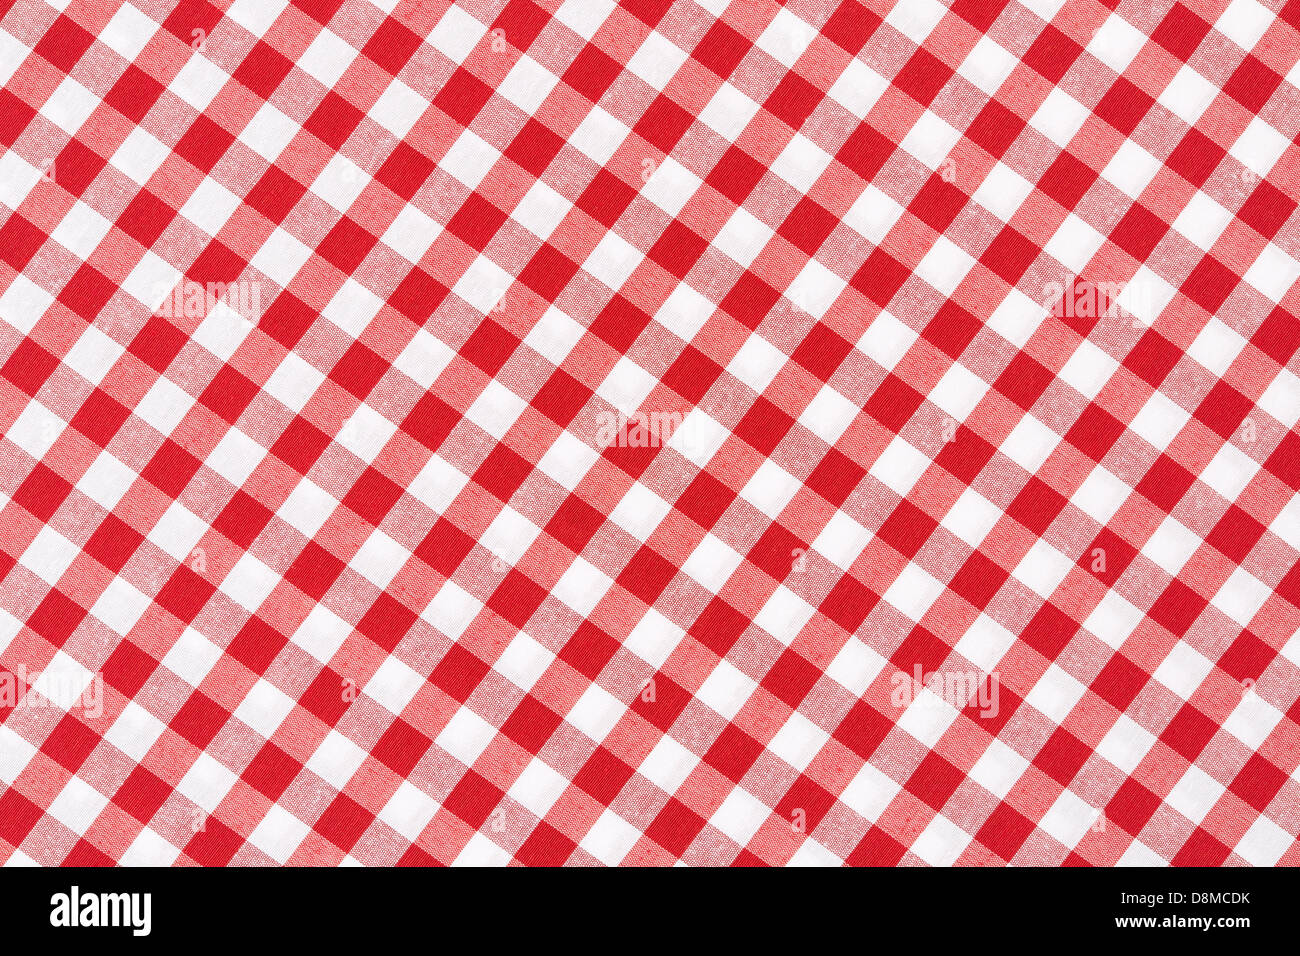 Red and white gingham tablecloth diagonal texture background Stock Photo